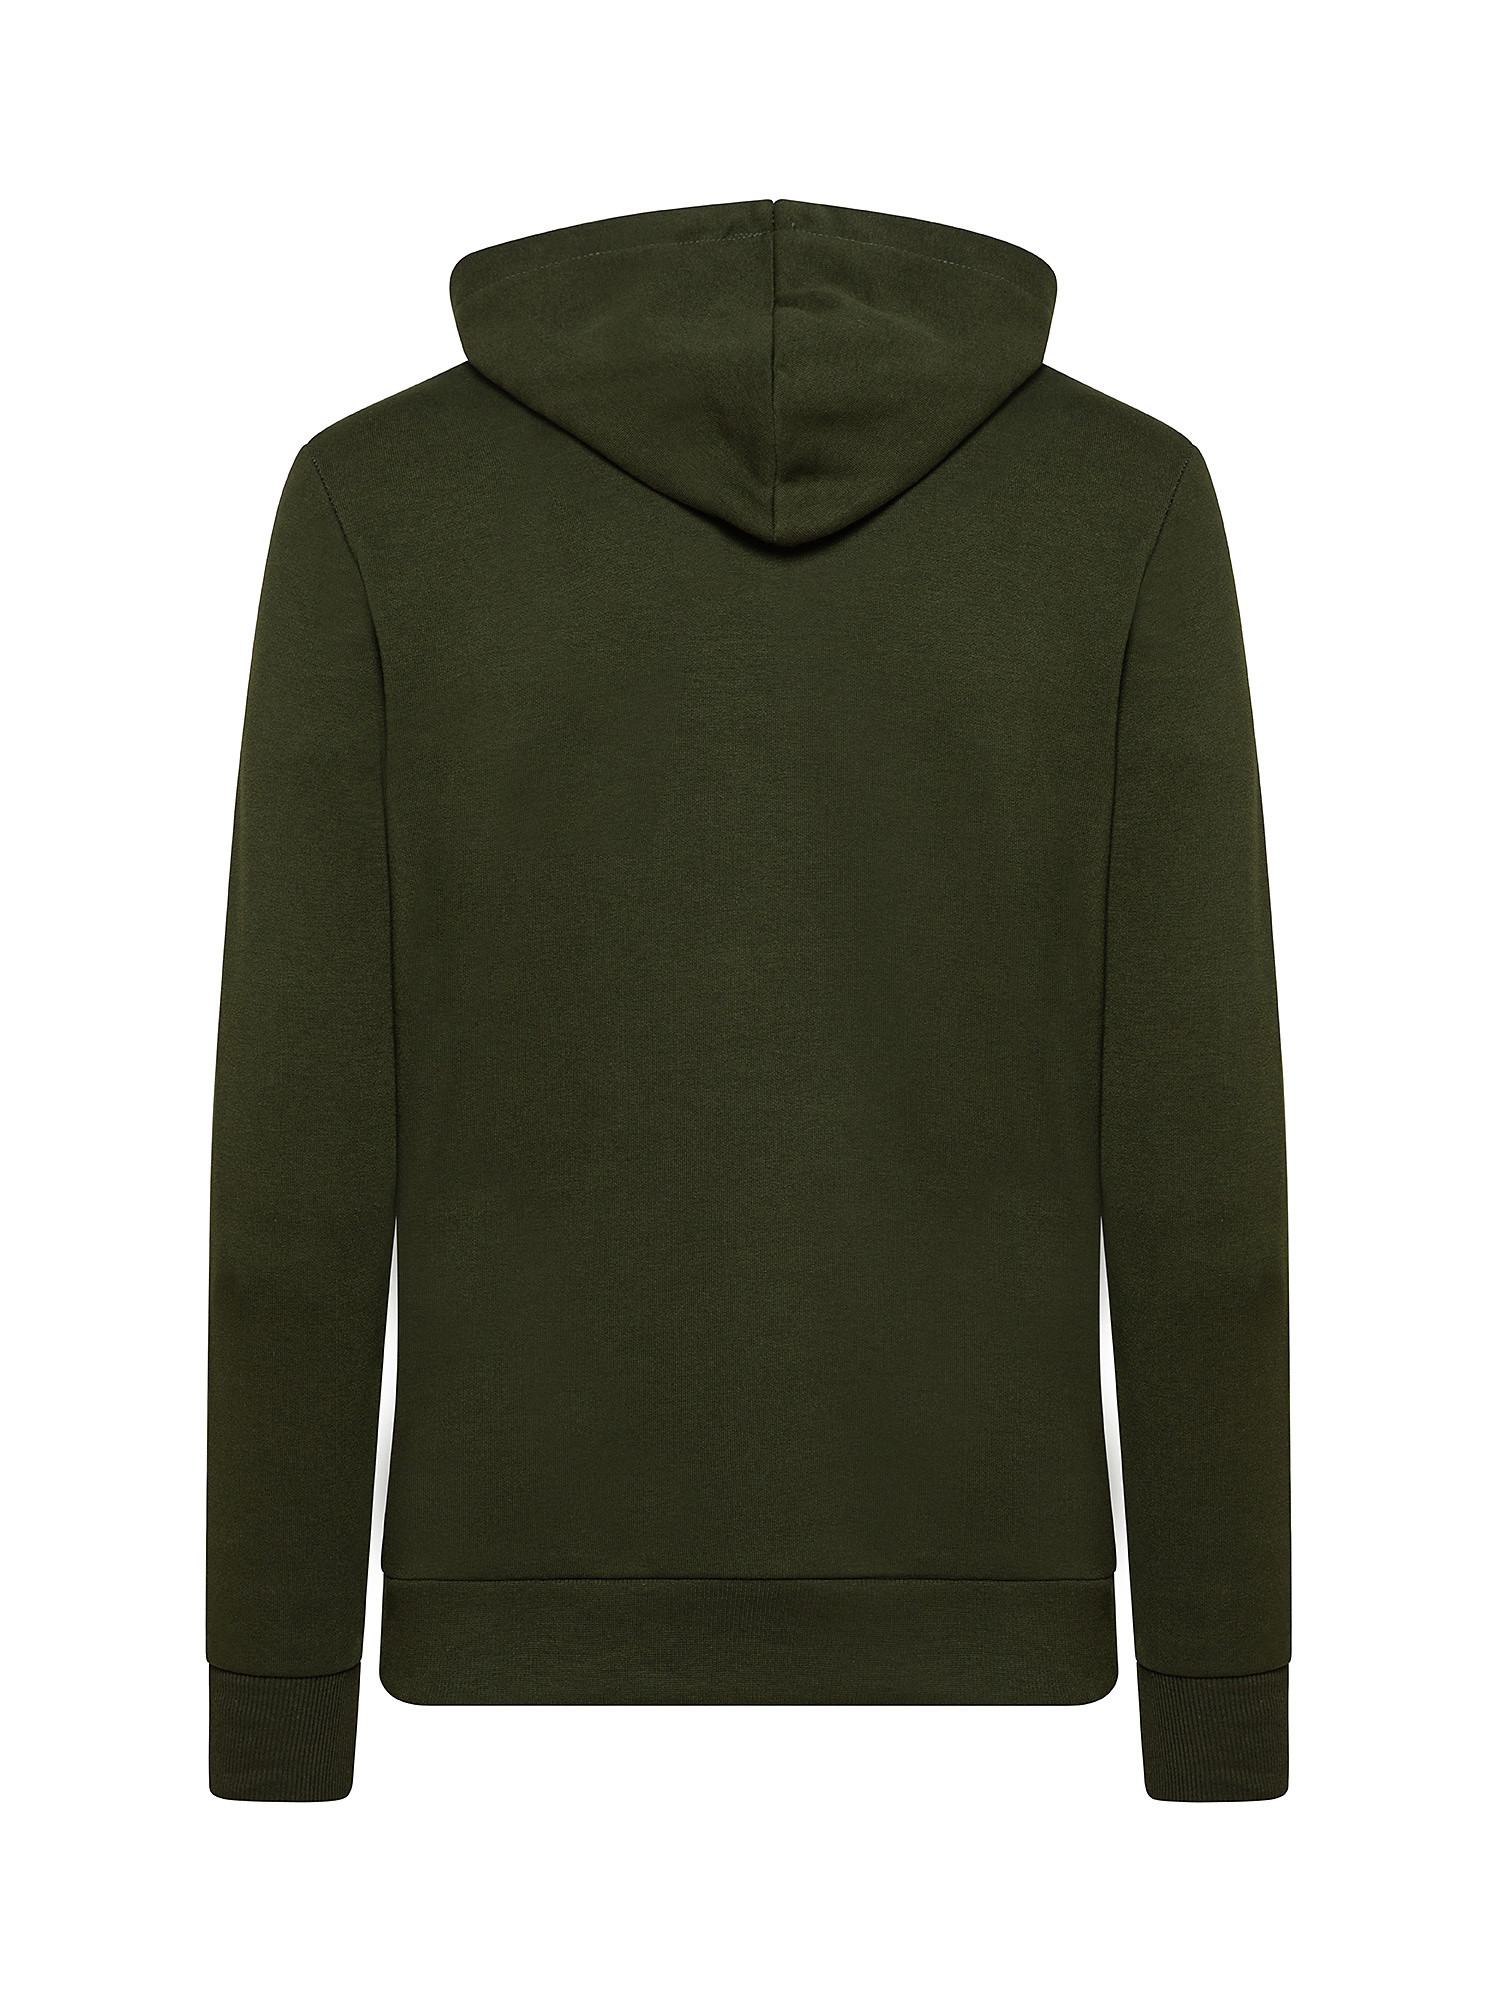 Sweatshirt with hood and long sleeves, Green, large image number 1